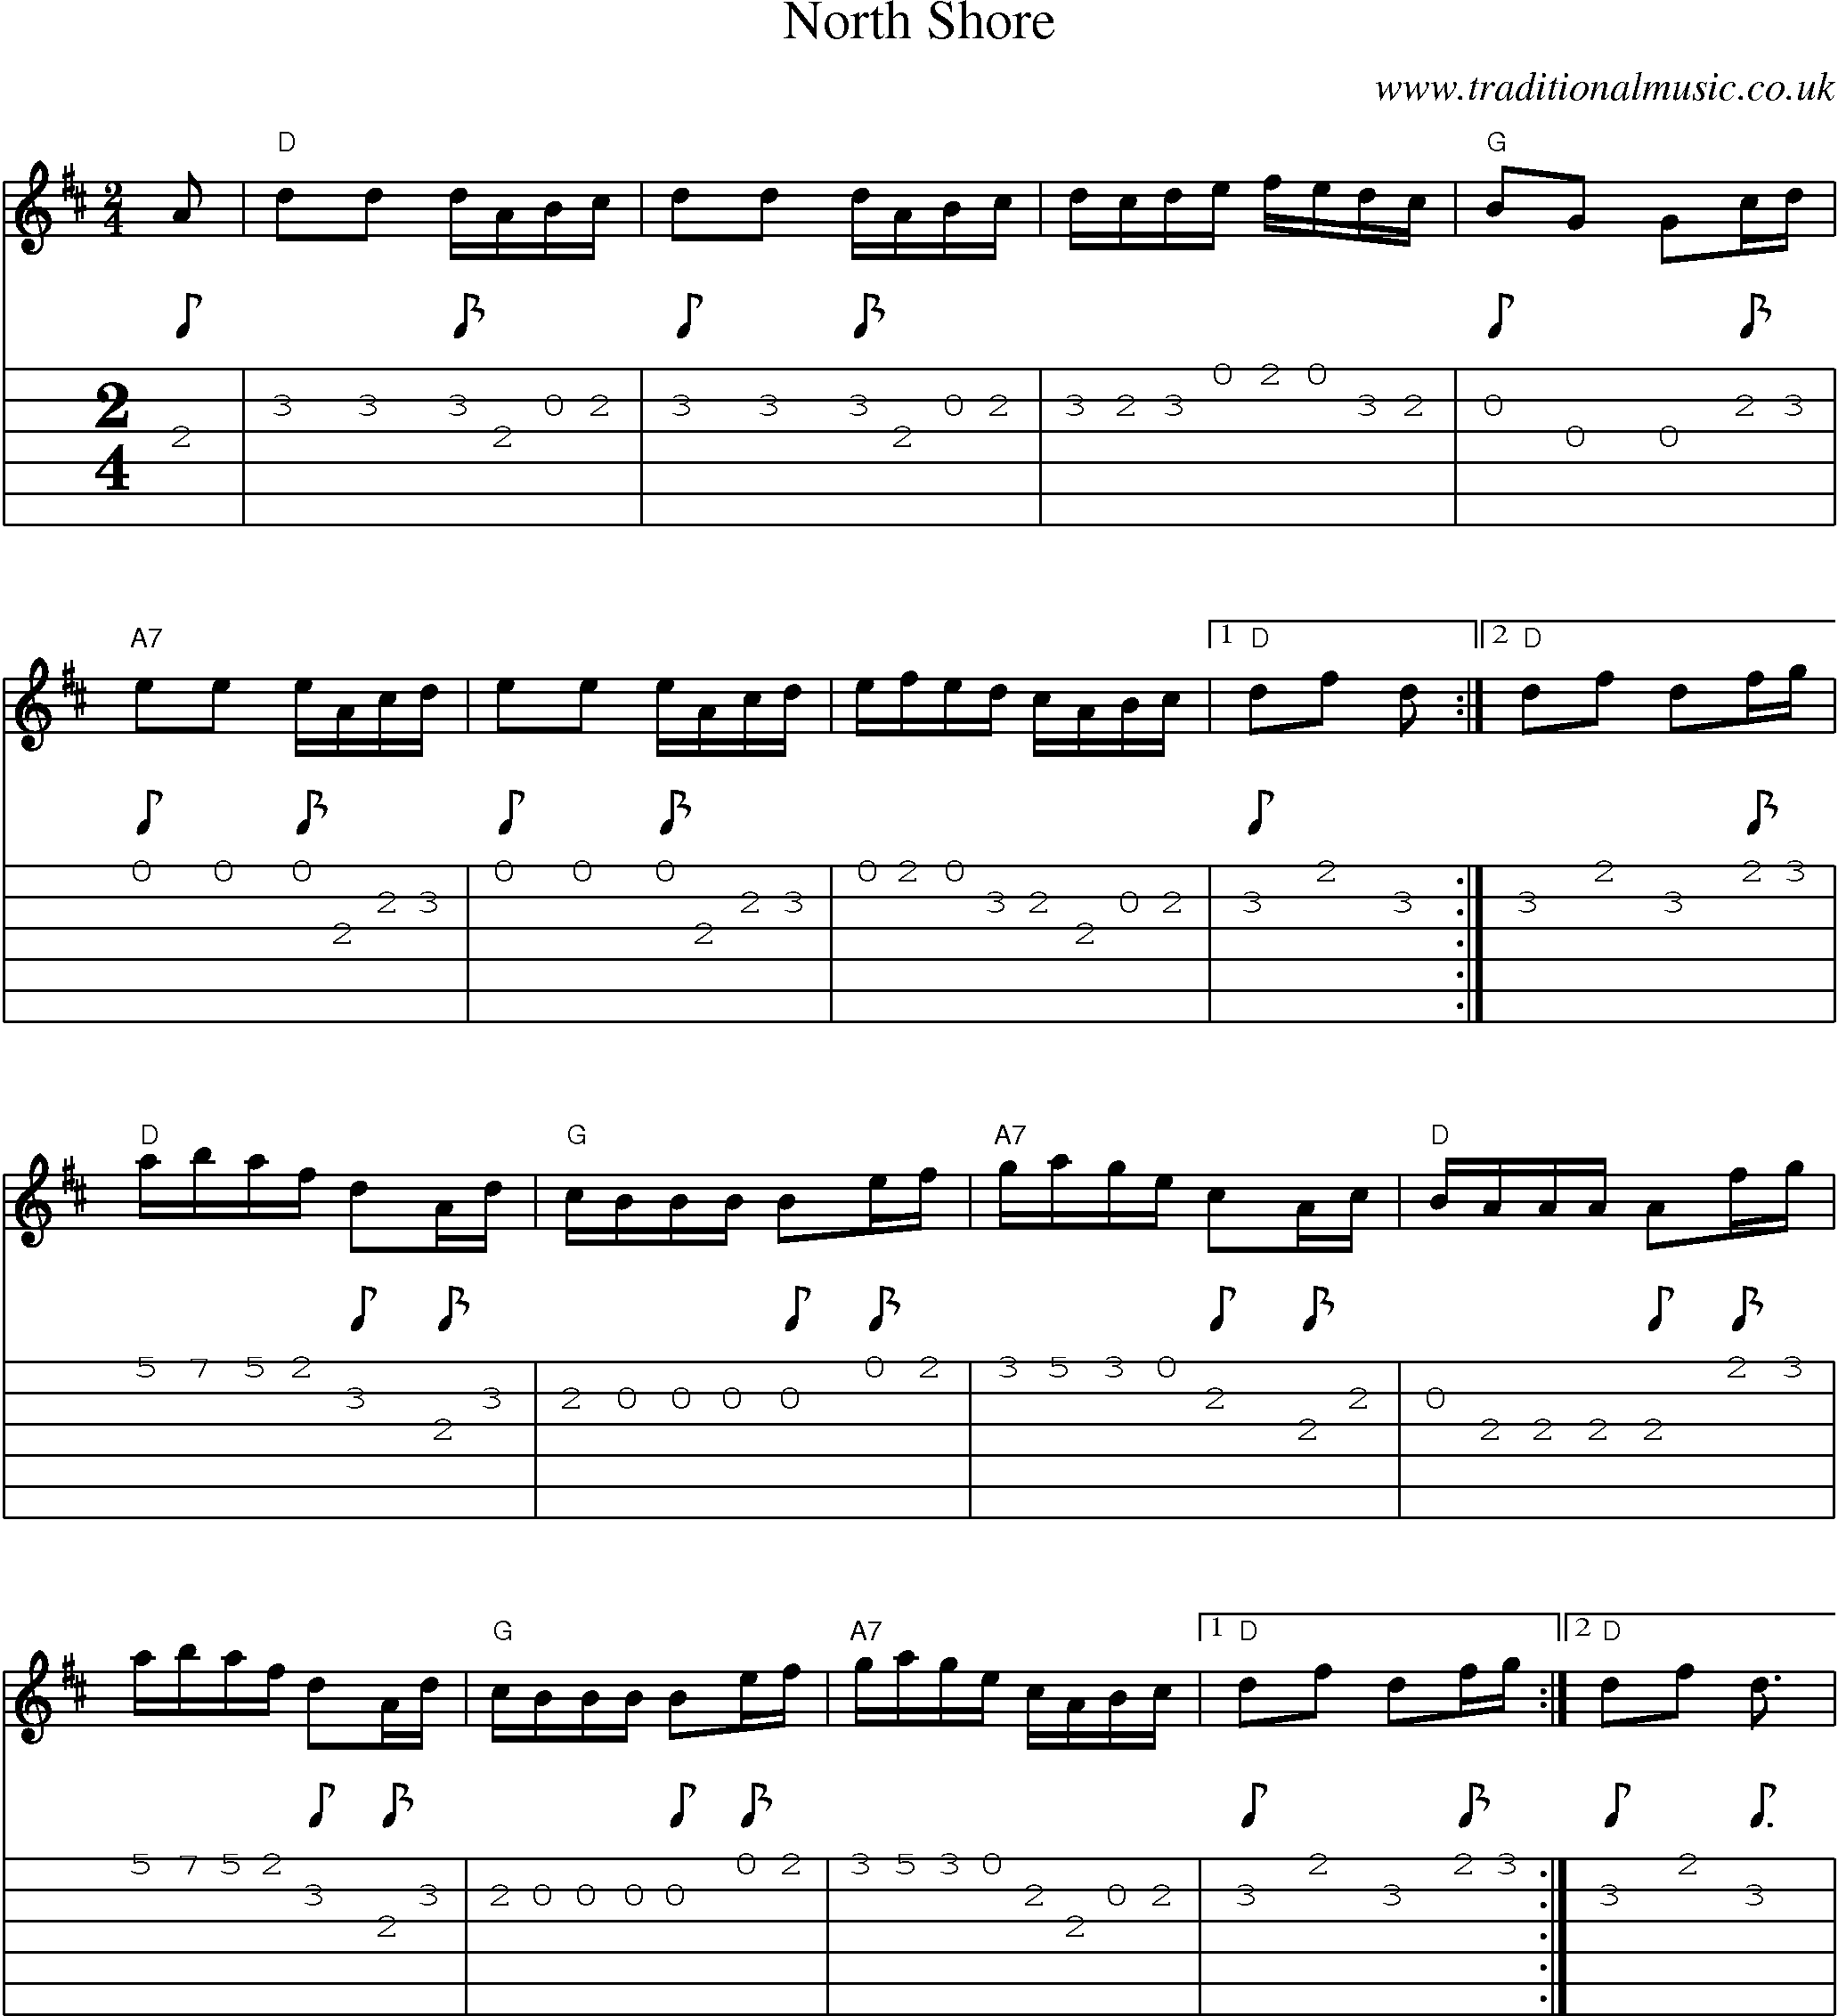 Music Score and Guitar Tabs for North Shore